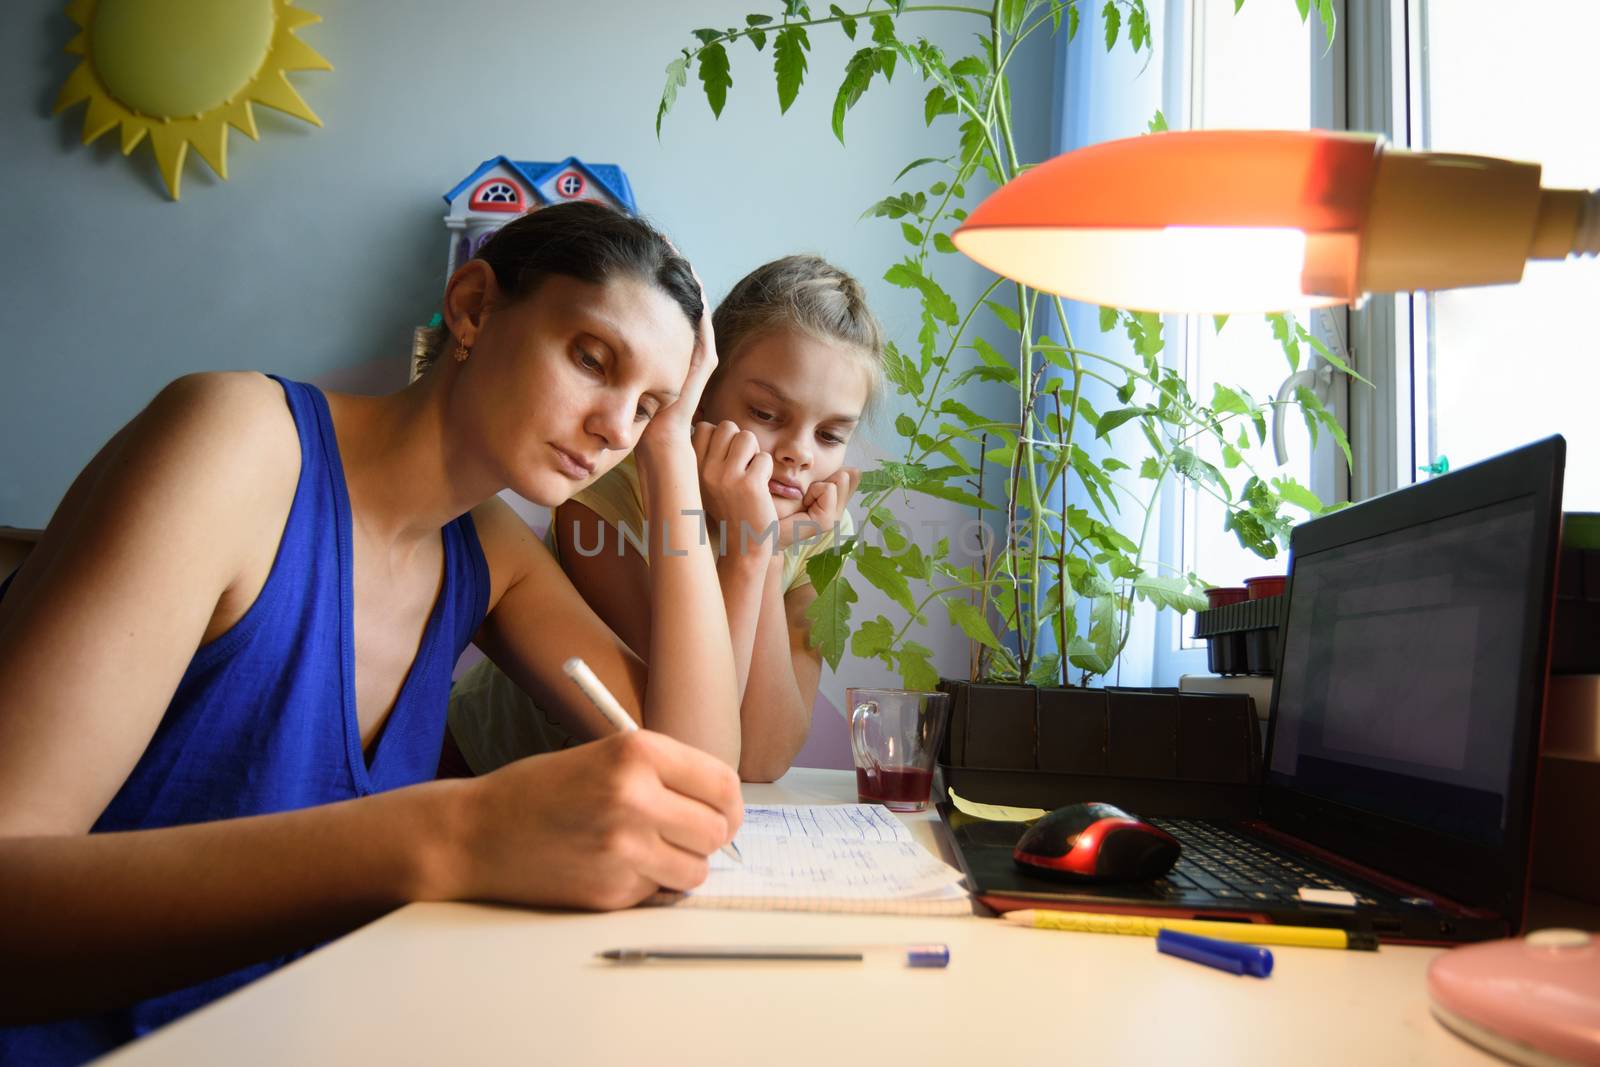 Mother solves daughter's assignments to study in notebooks at home at the desk by Madhourse